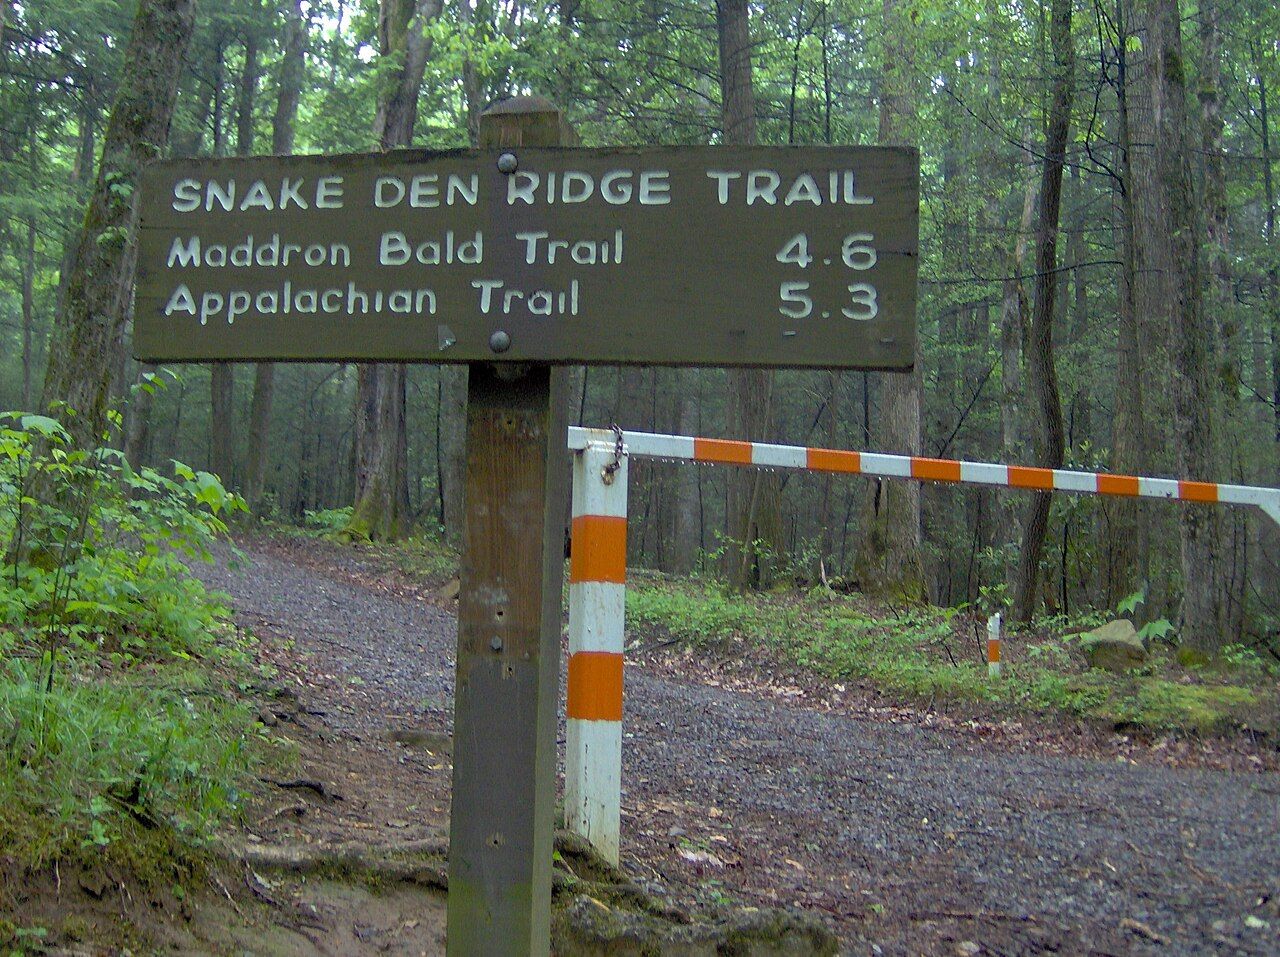 The Snake Den Ridge Trailhead in the Cosby section of the Great Smoky Mountains National Park